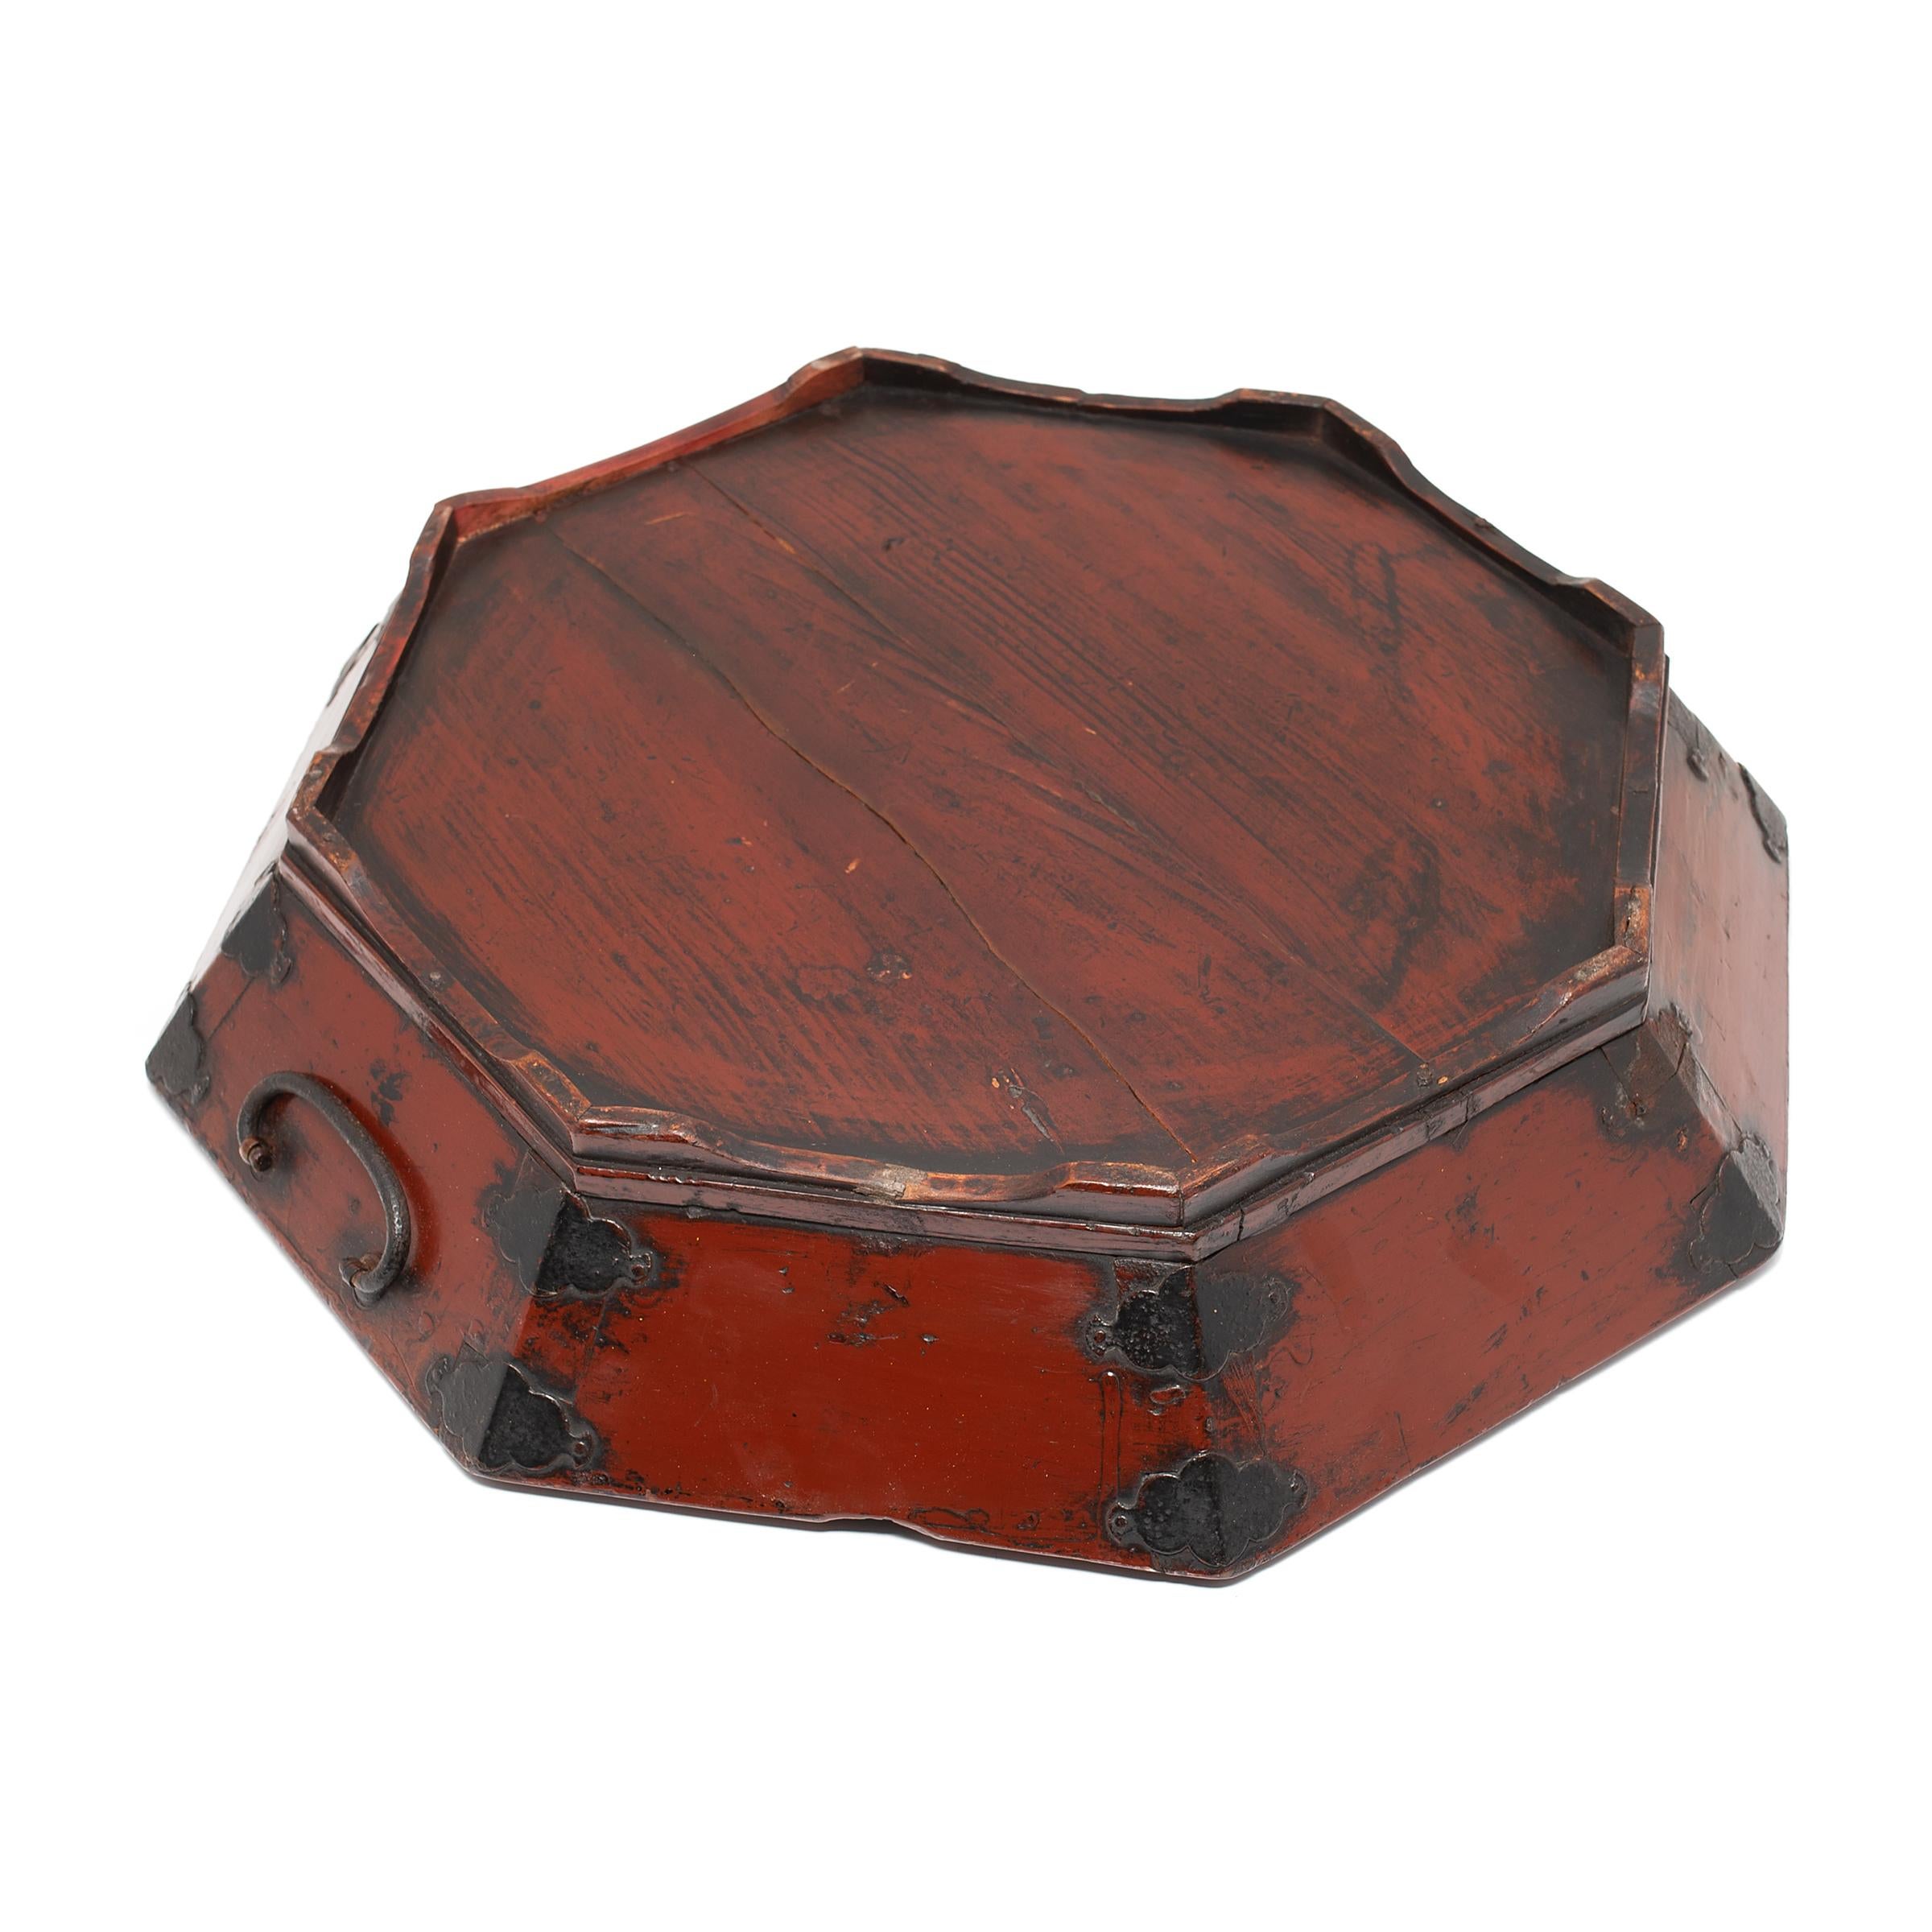 Lacquered Chinese Octagonal Red Lacquer Tray, C. 1870